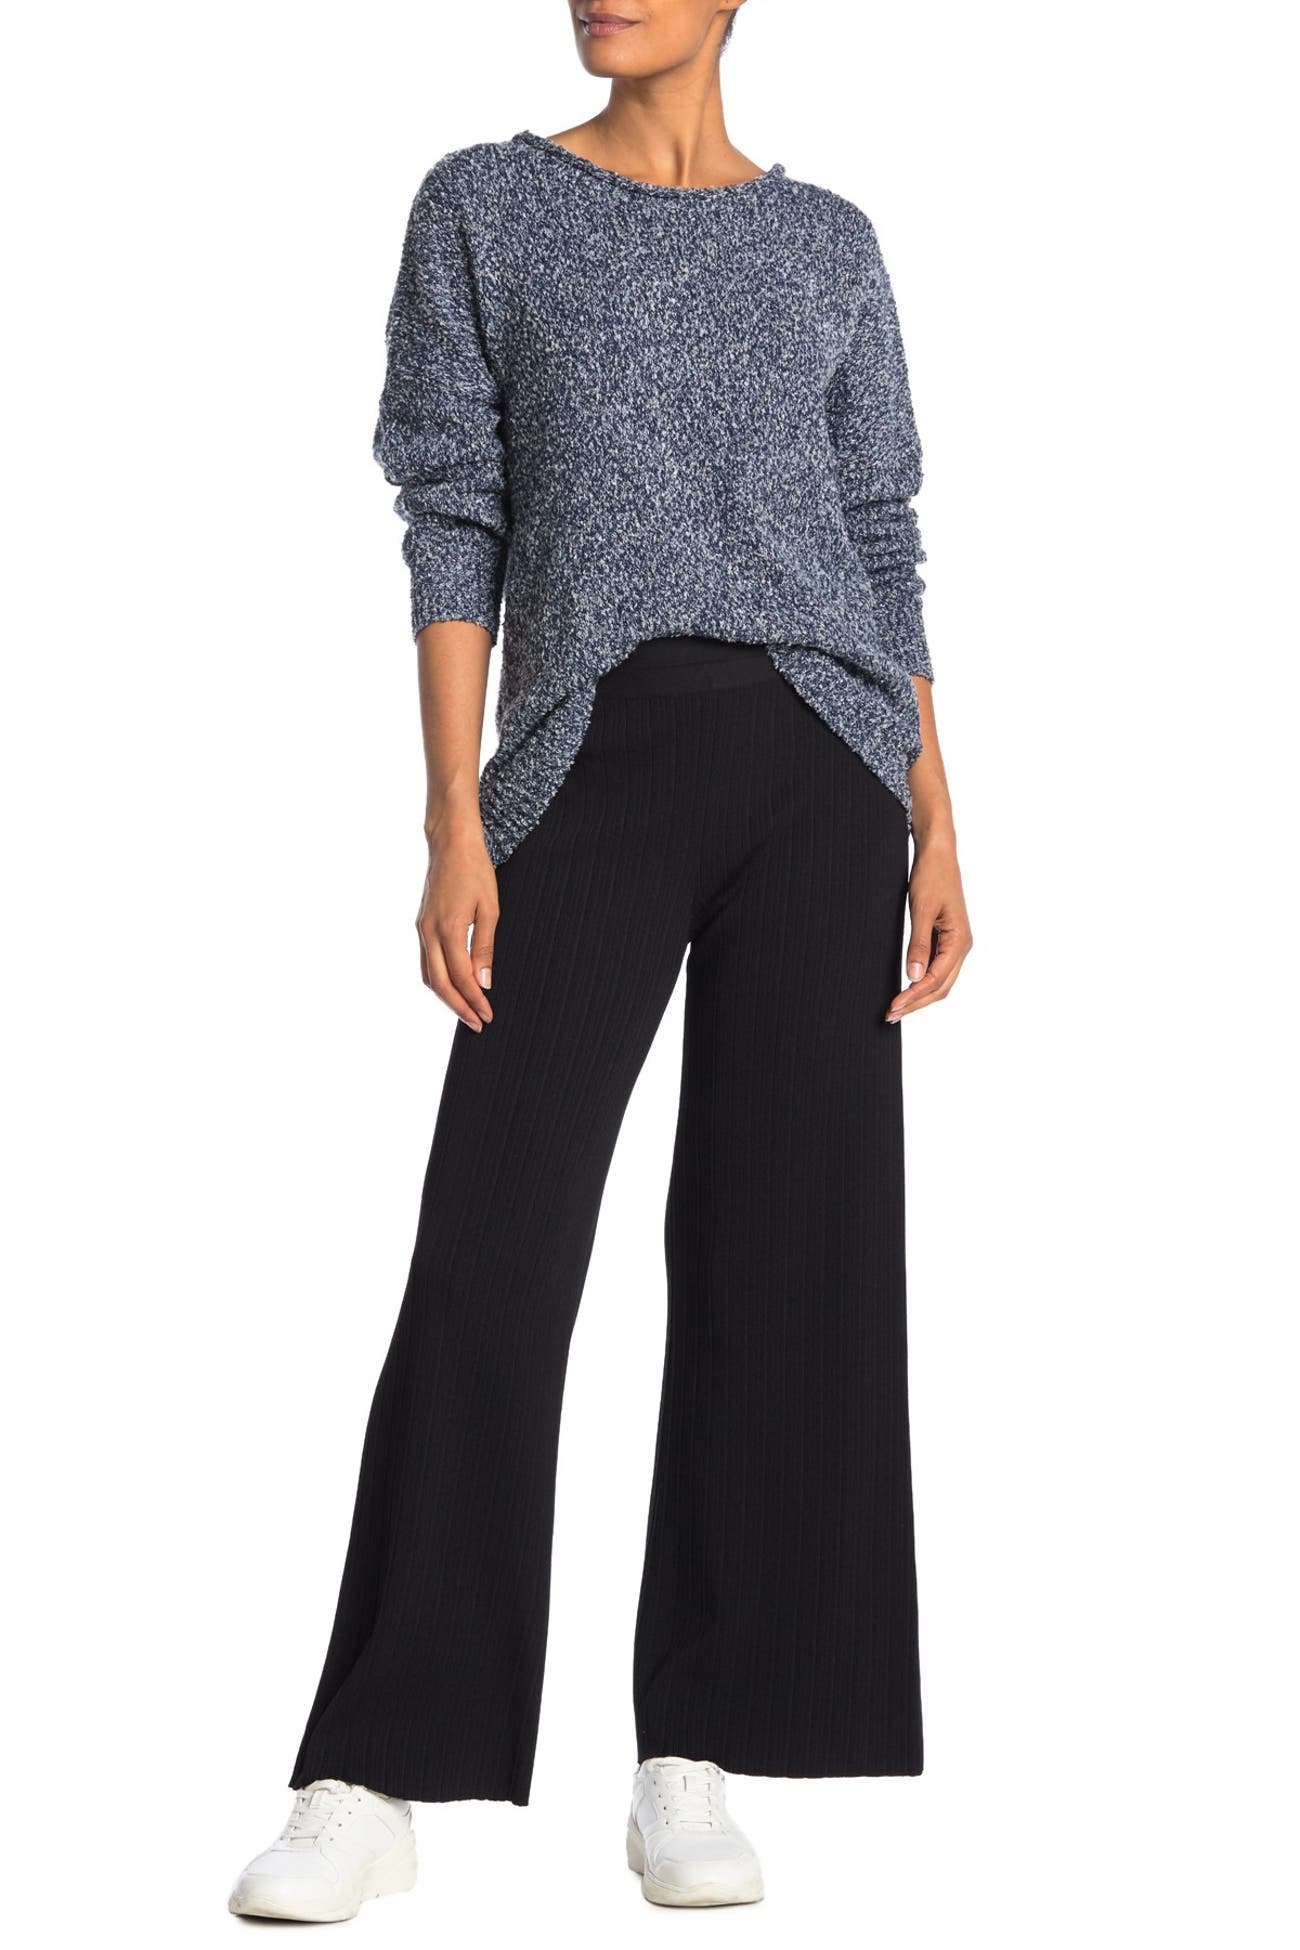 Theory | Knit Lounge Pants | Nordstrom Rack